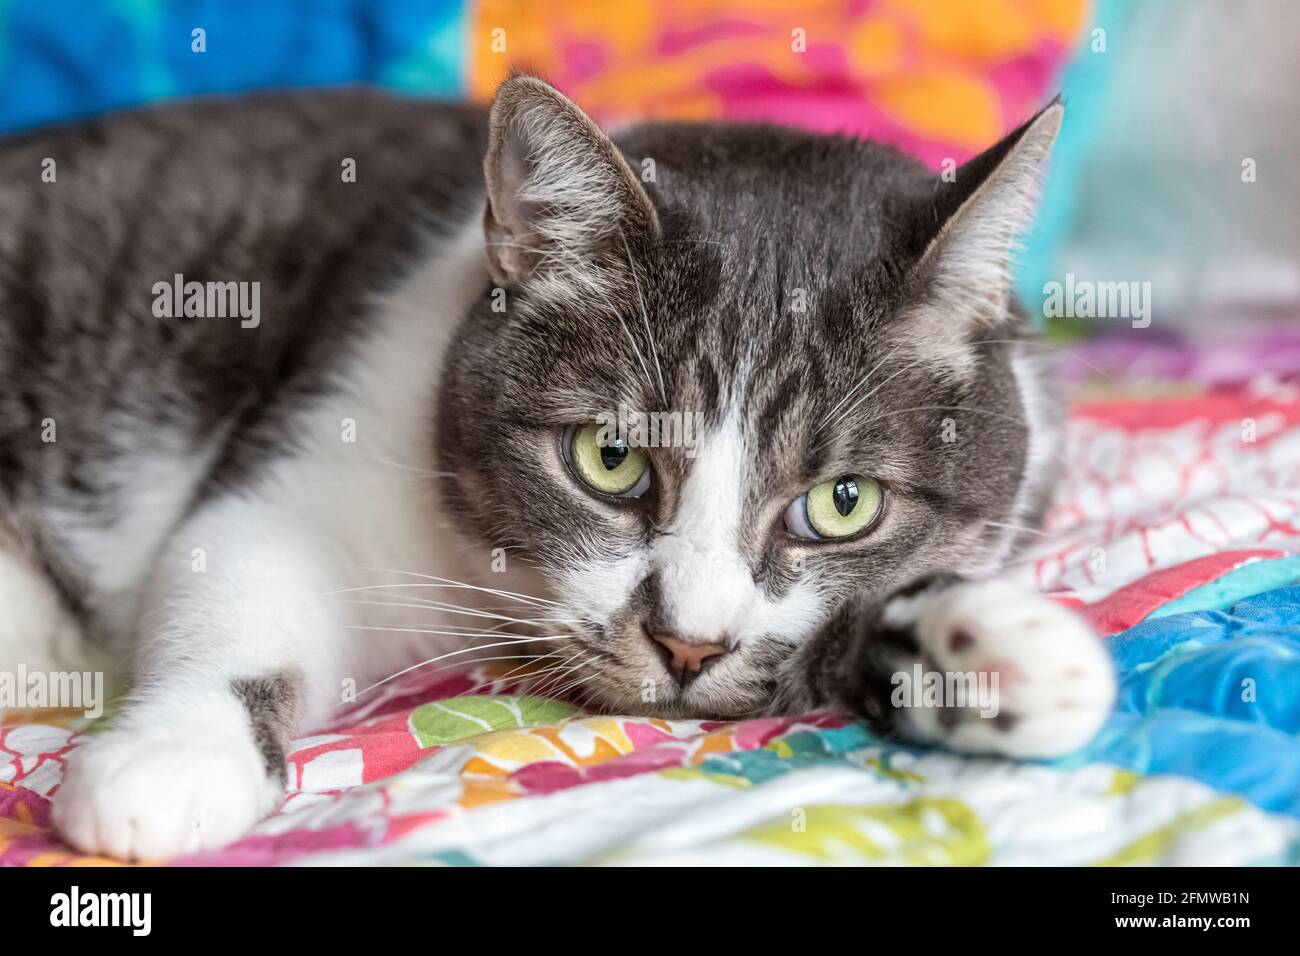 Domestic Shorthair, striped grey and white tabby cat, relaxing. Stock Photo